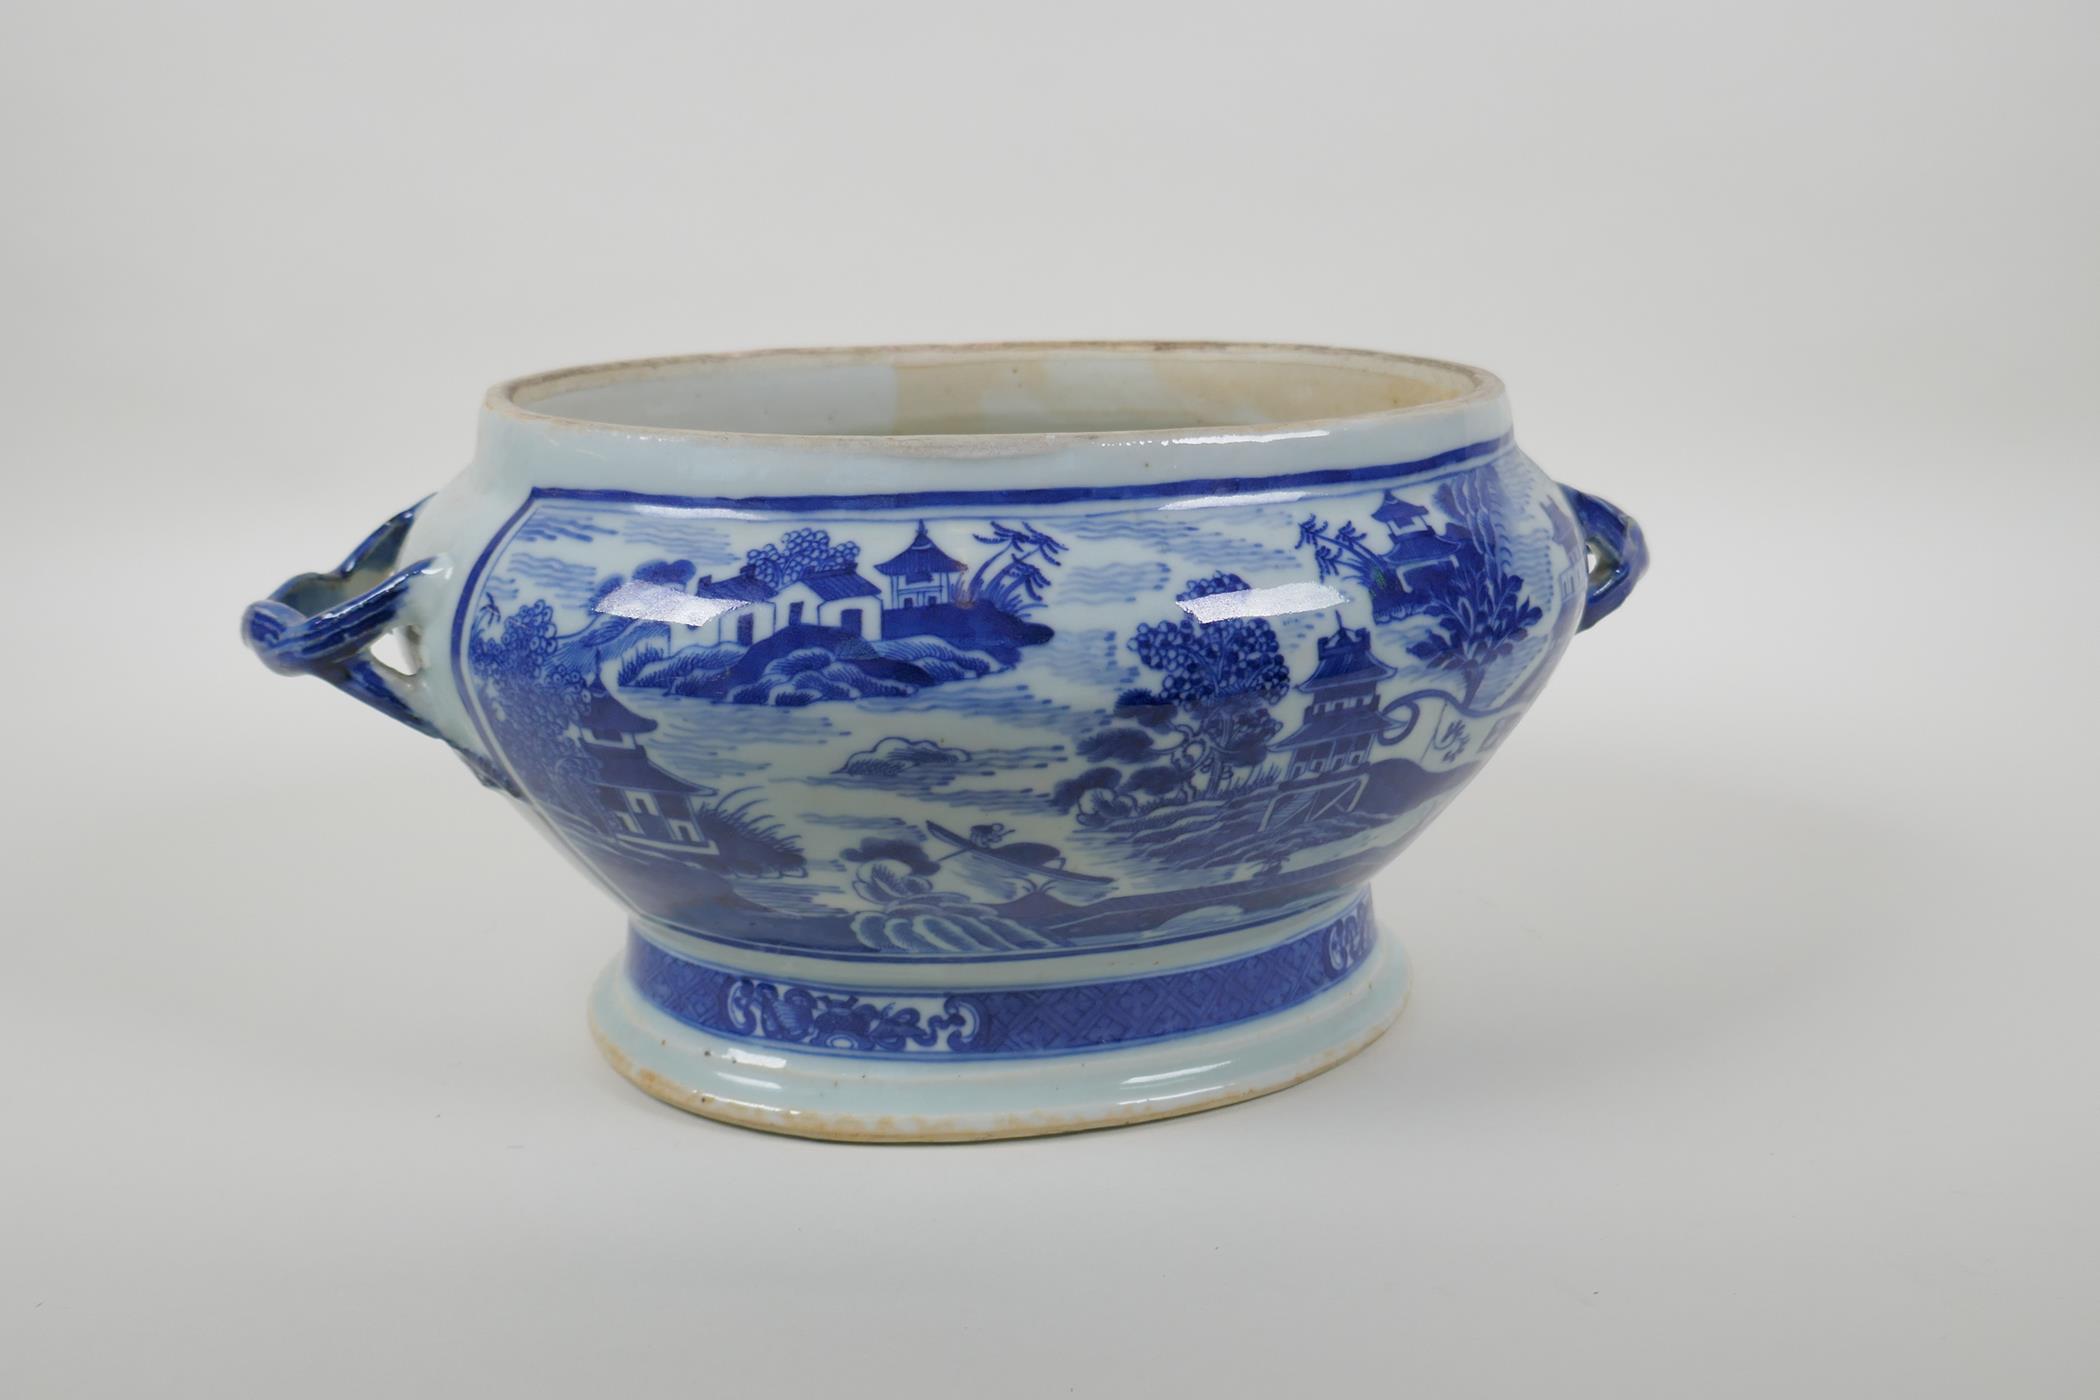 A C19th Chinese export blue and white porcelain two handled oval planter with decorative riverside - Image 4 of 5